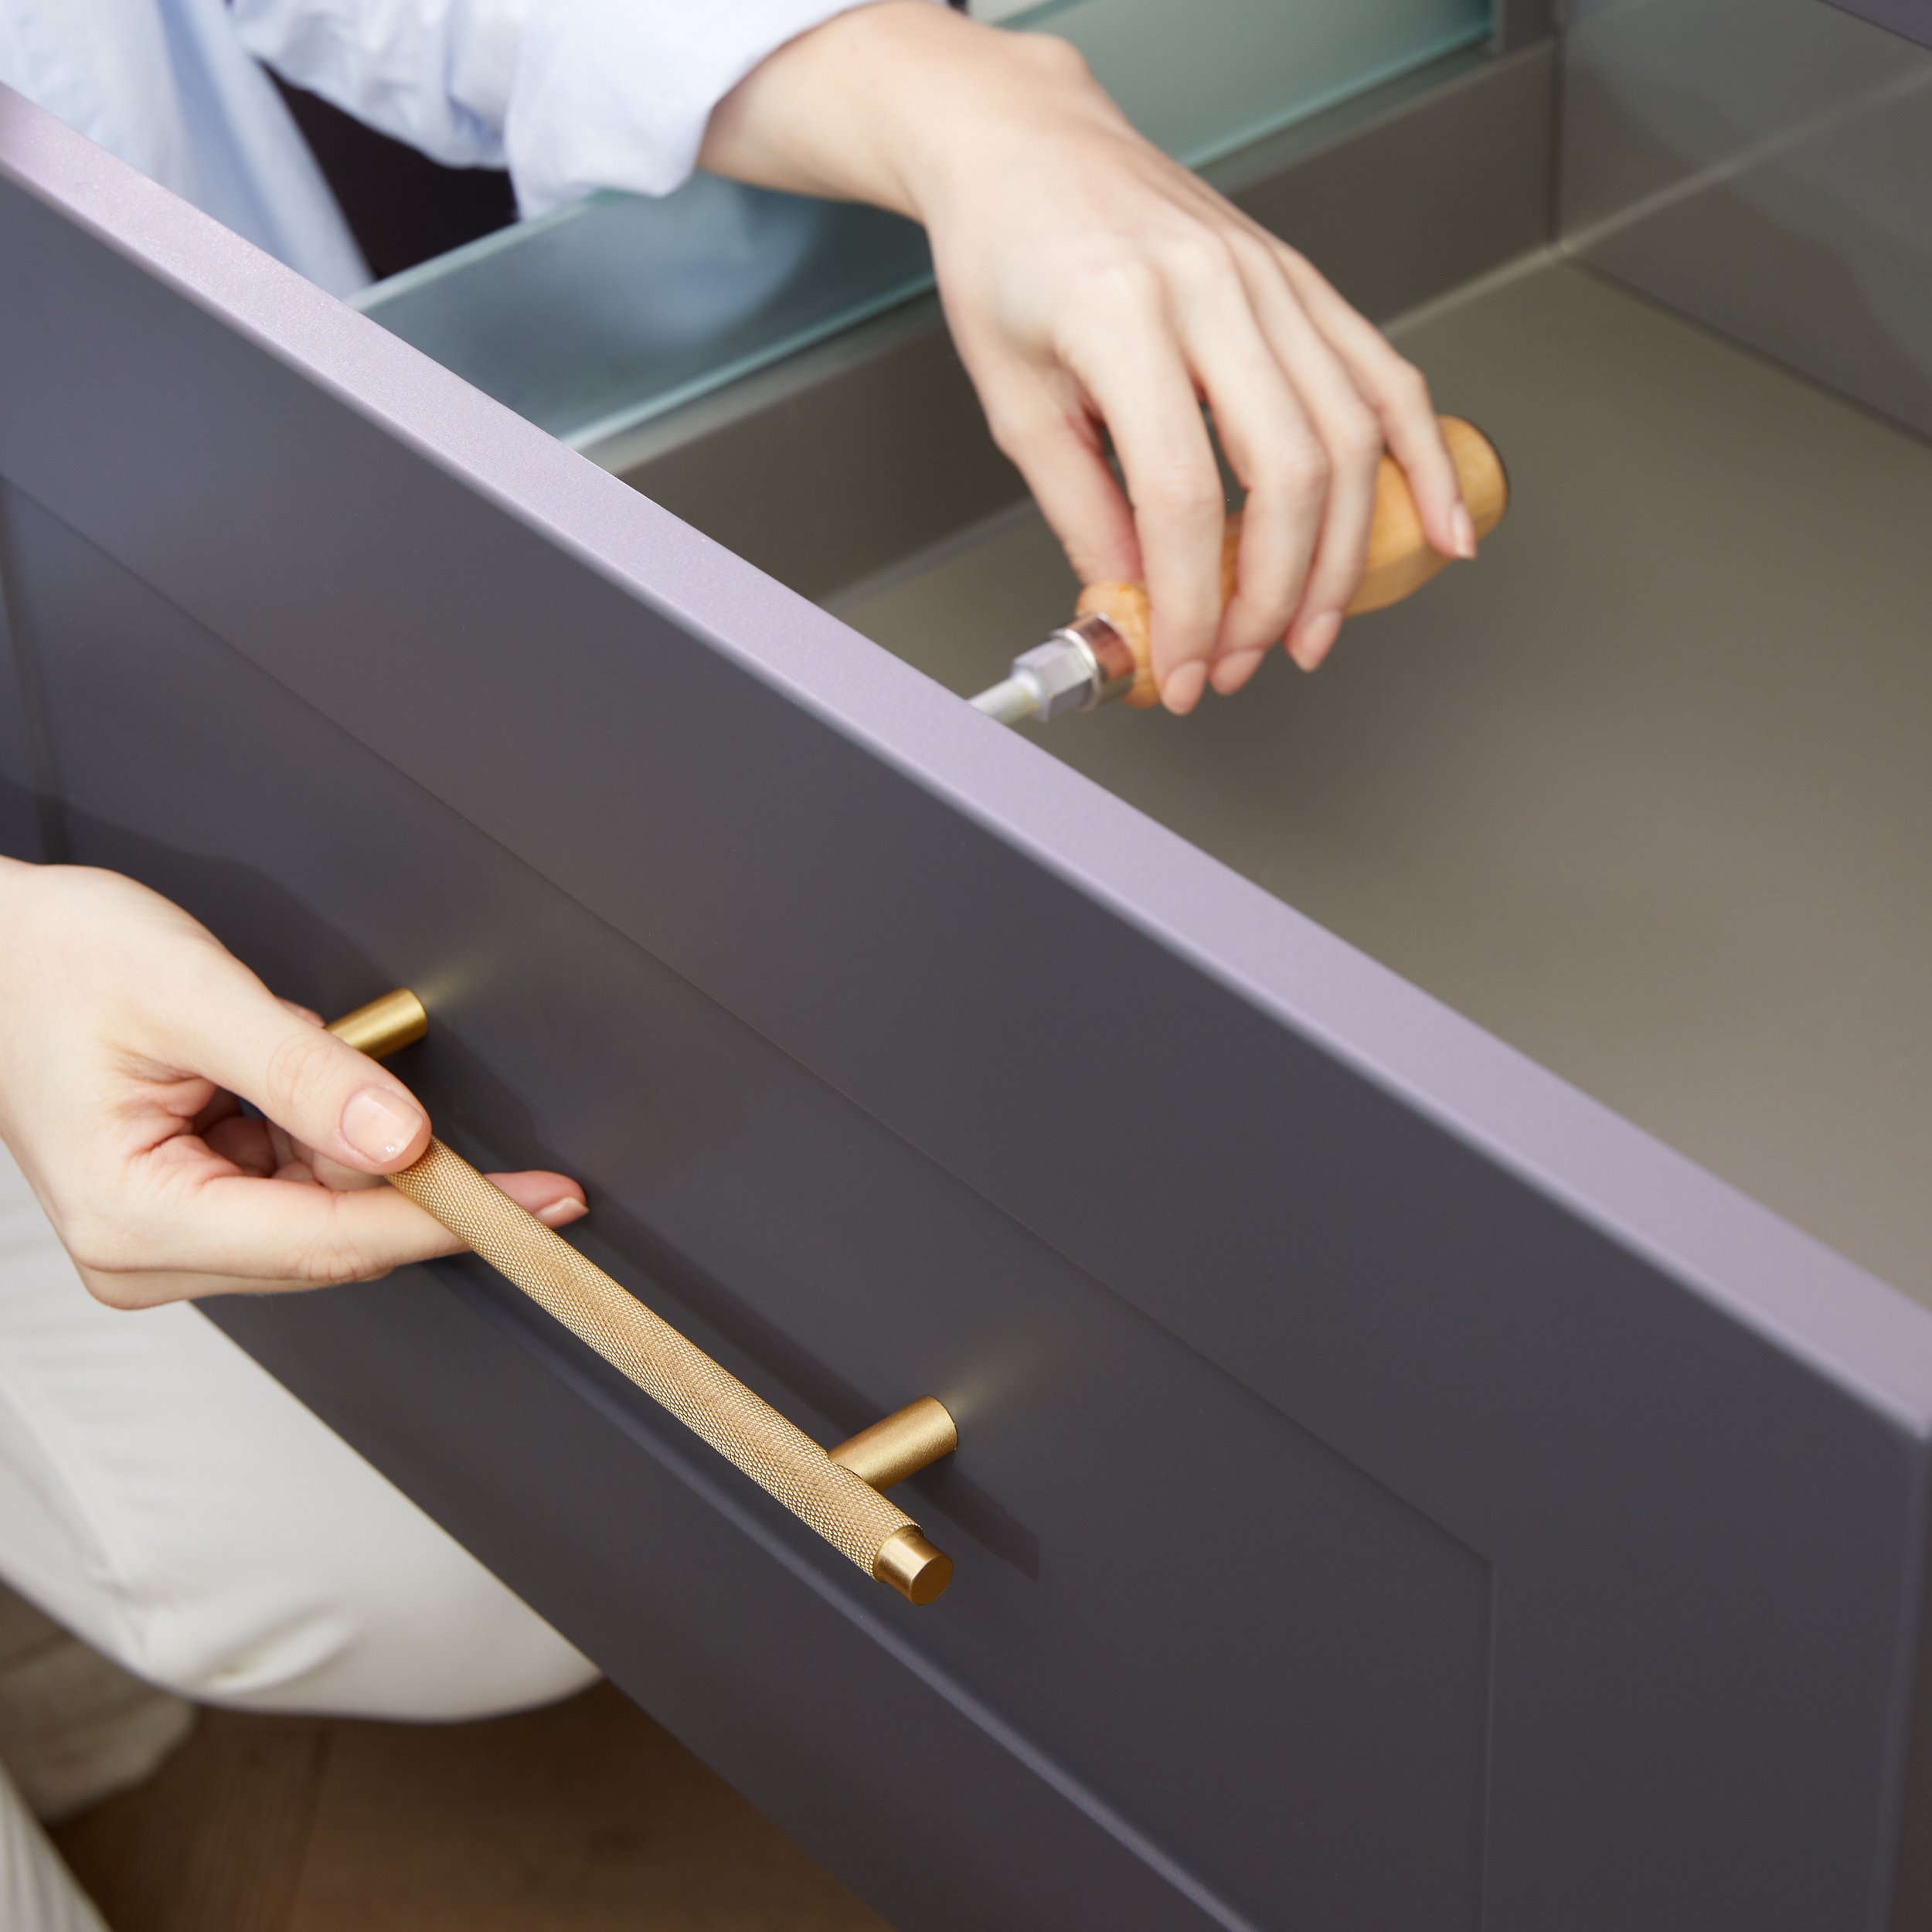 How To Install Cabinet Handles